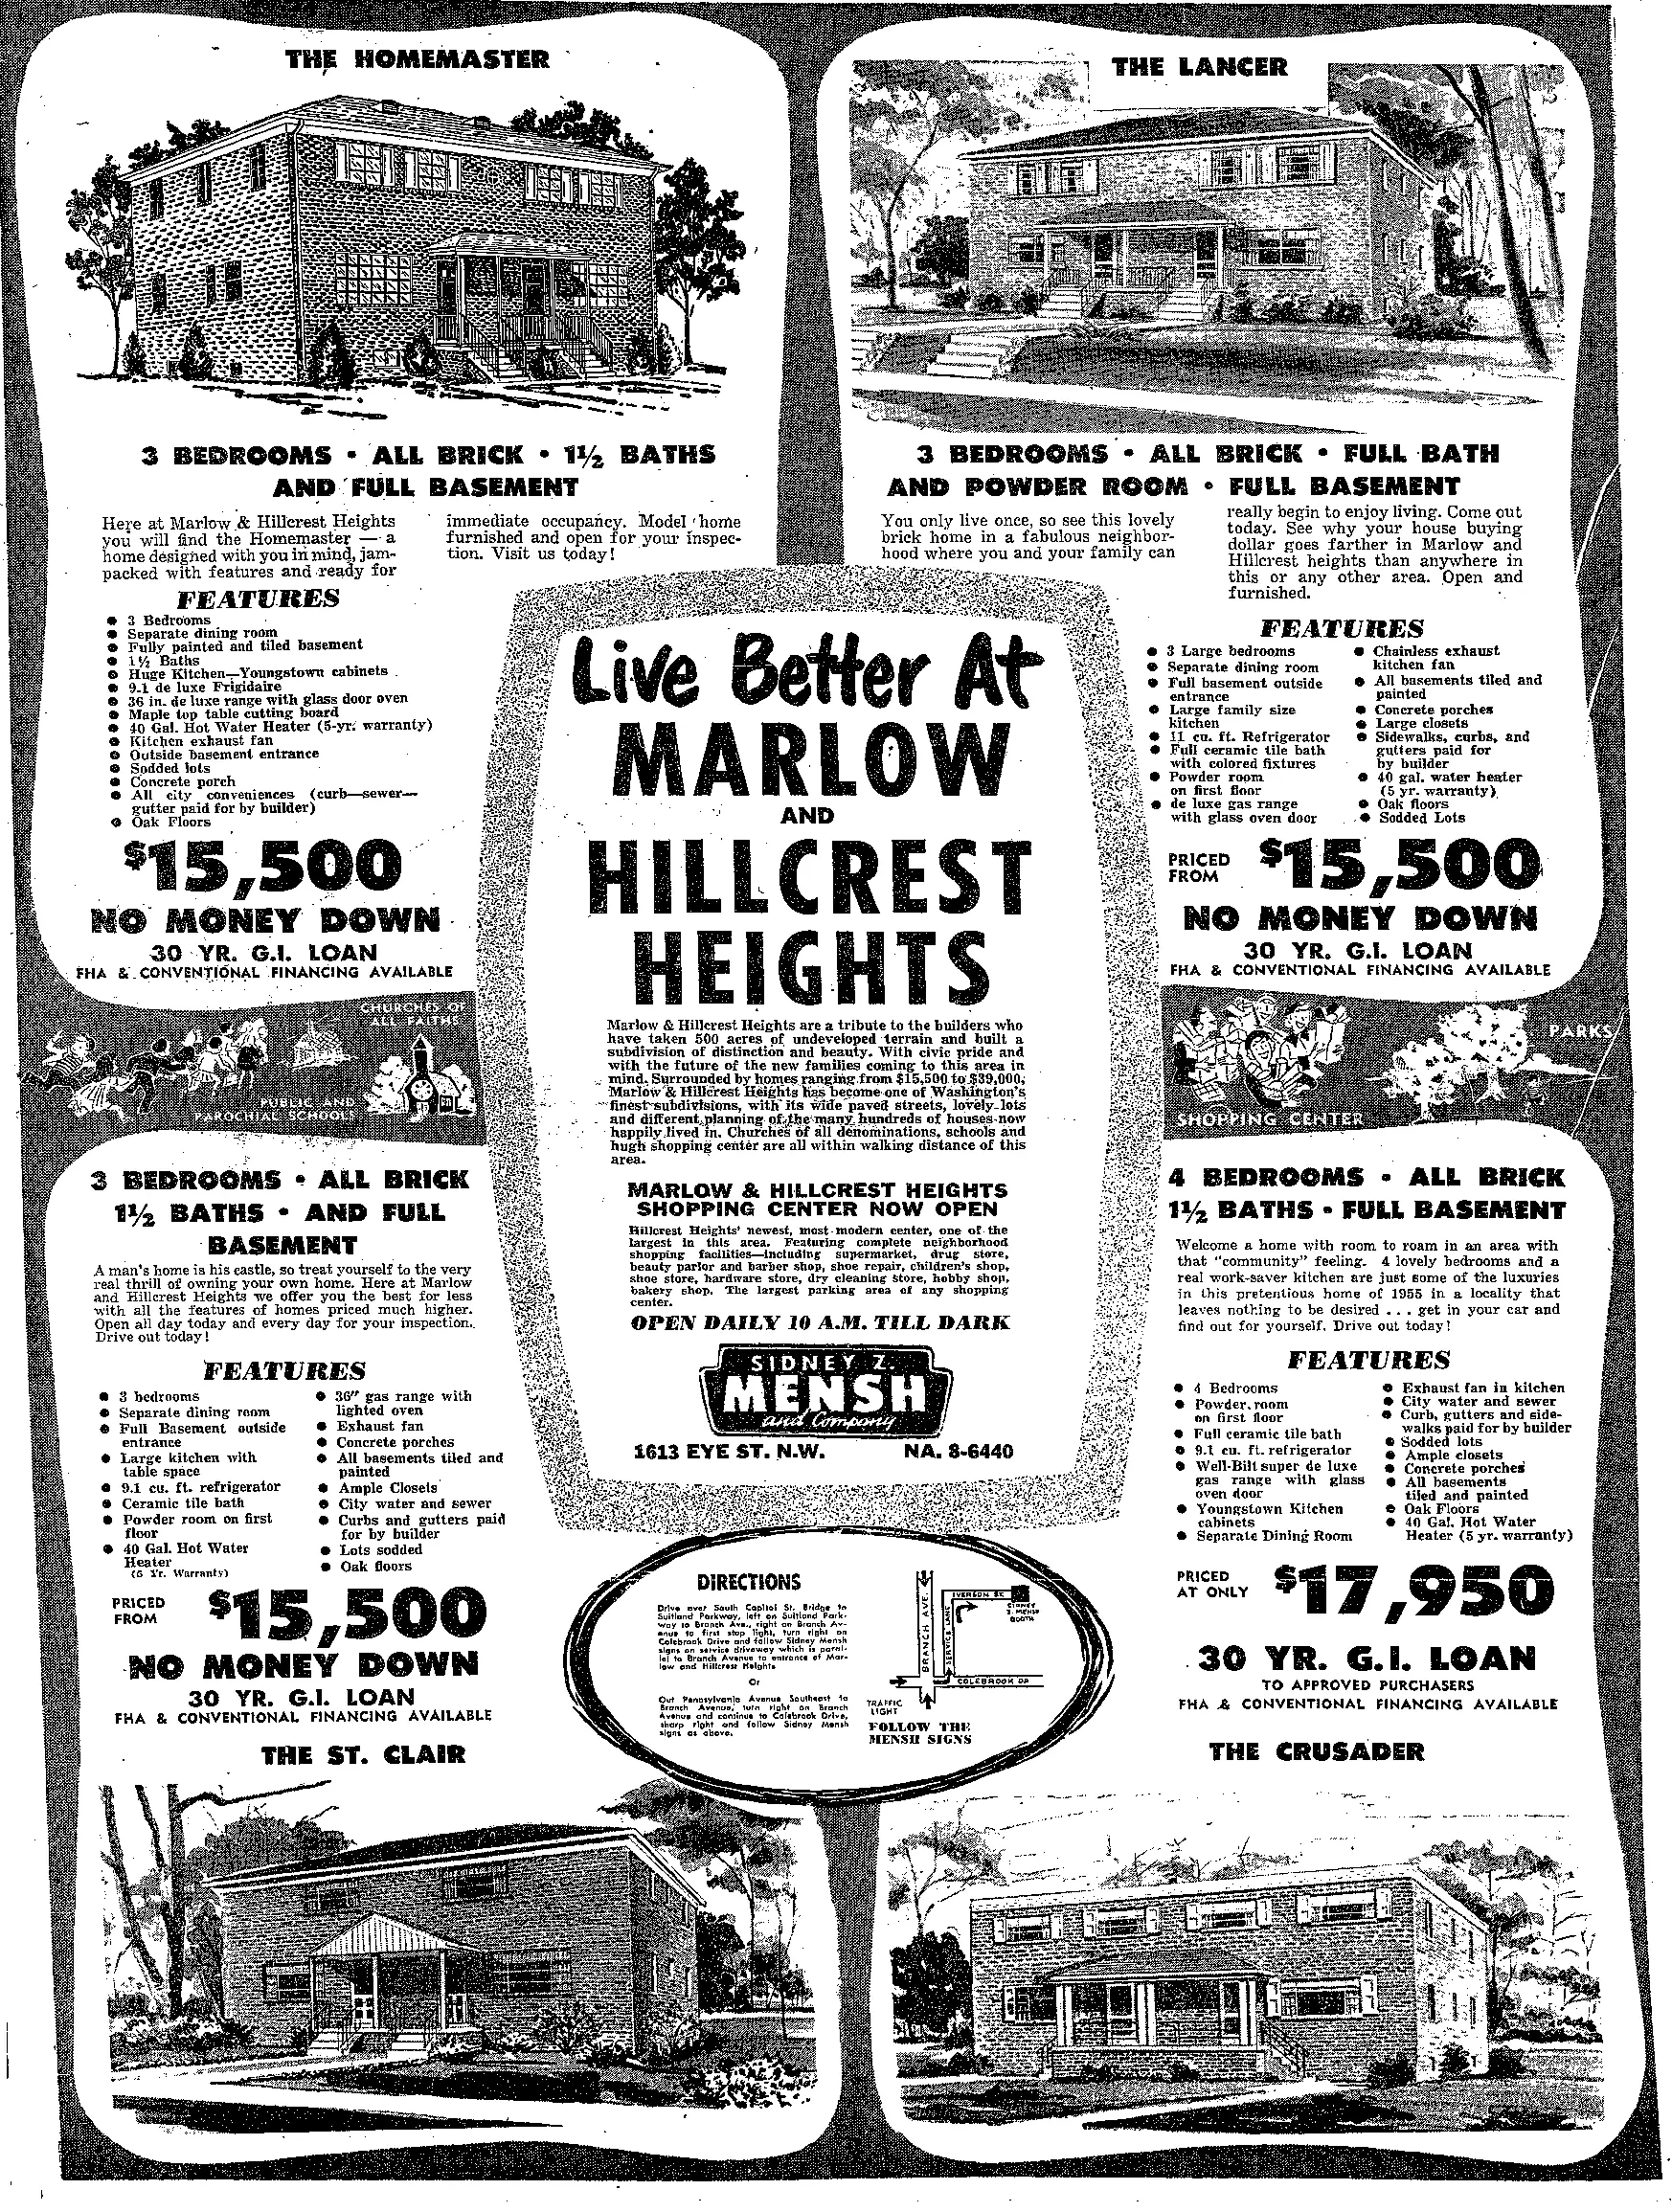 Marlow and Hillcrest Heights real estate advertisement - 1955